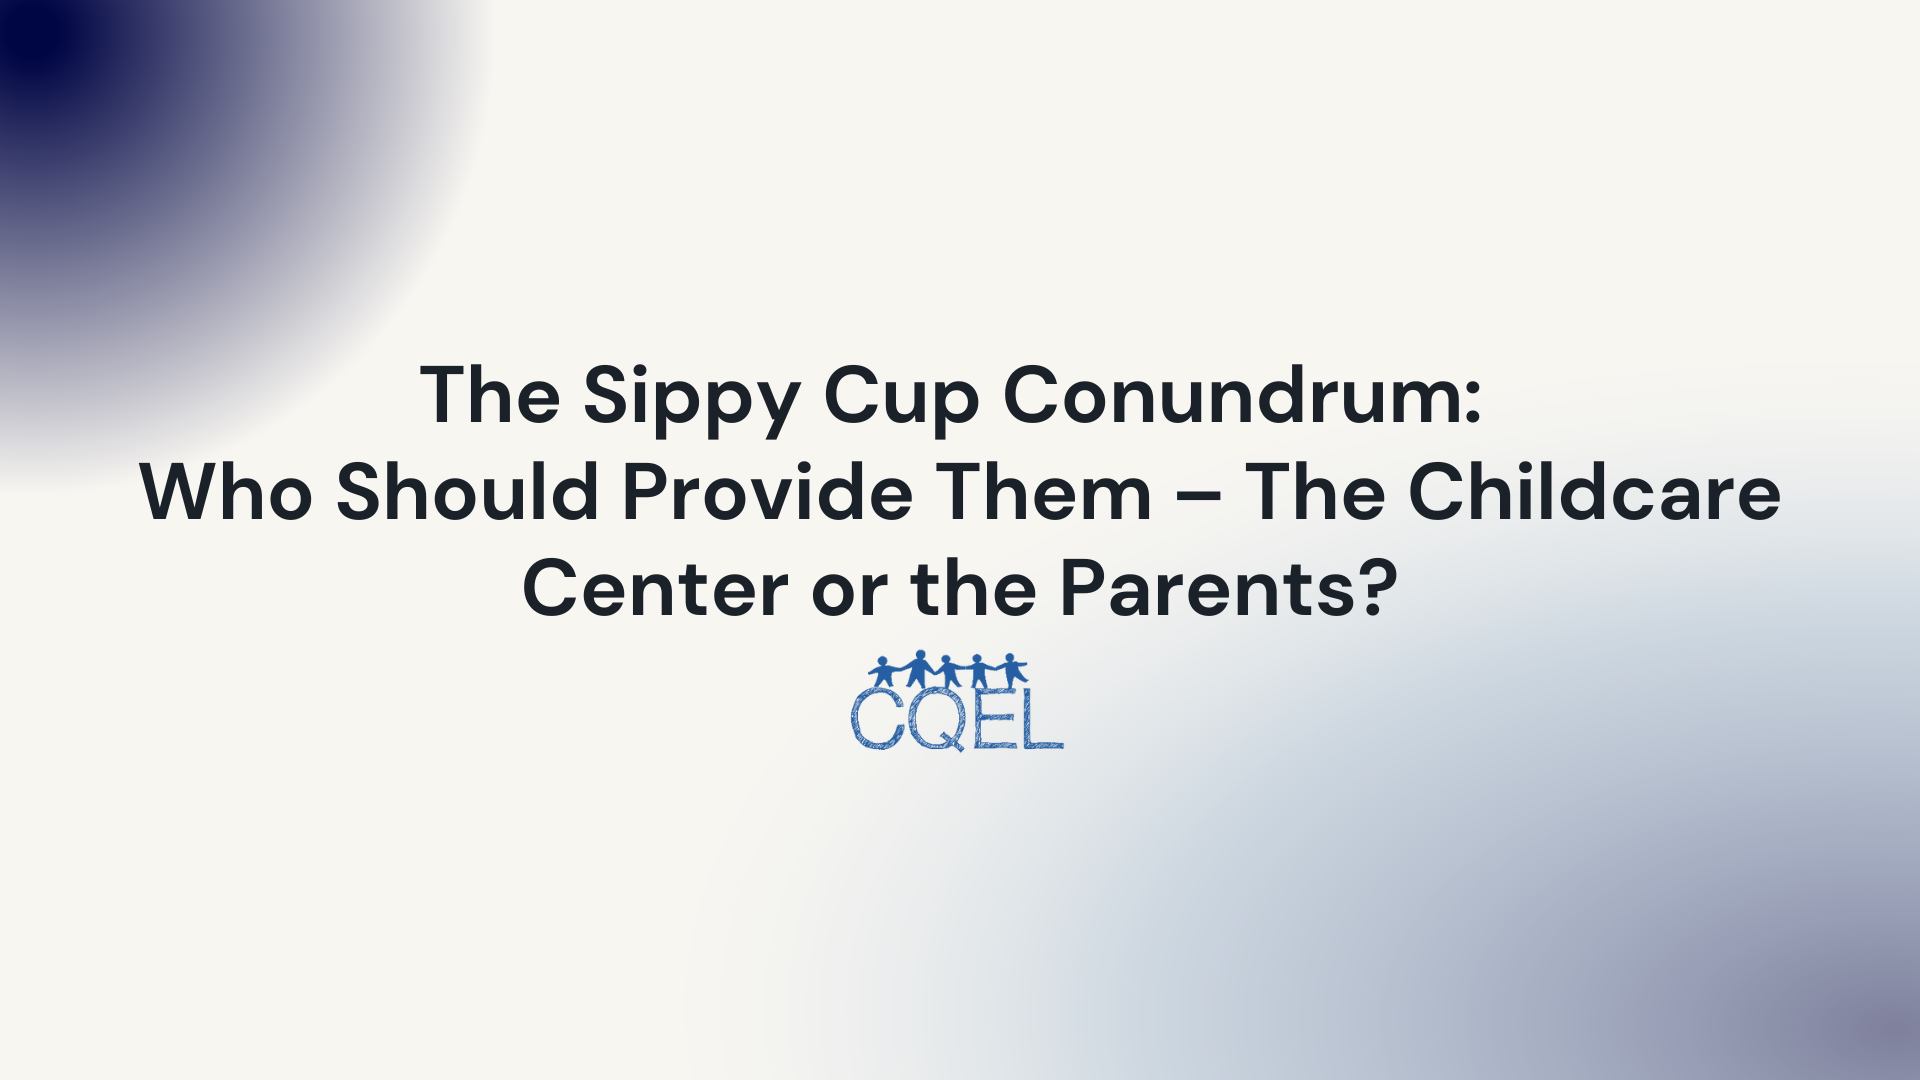 The Sippy Cup Conundrum: Who Should Provide Them – The Childcare Center or The Parents?